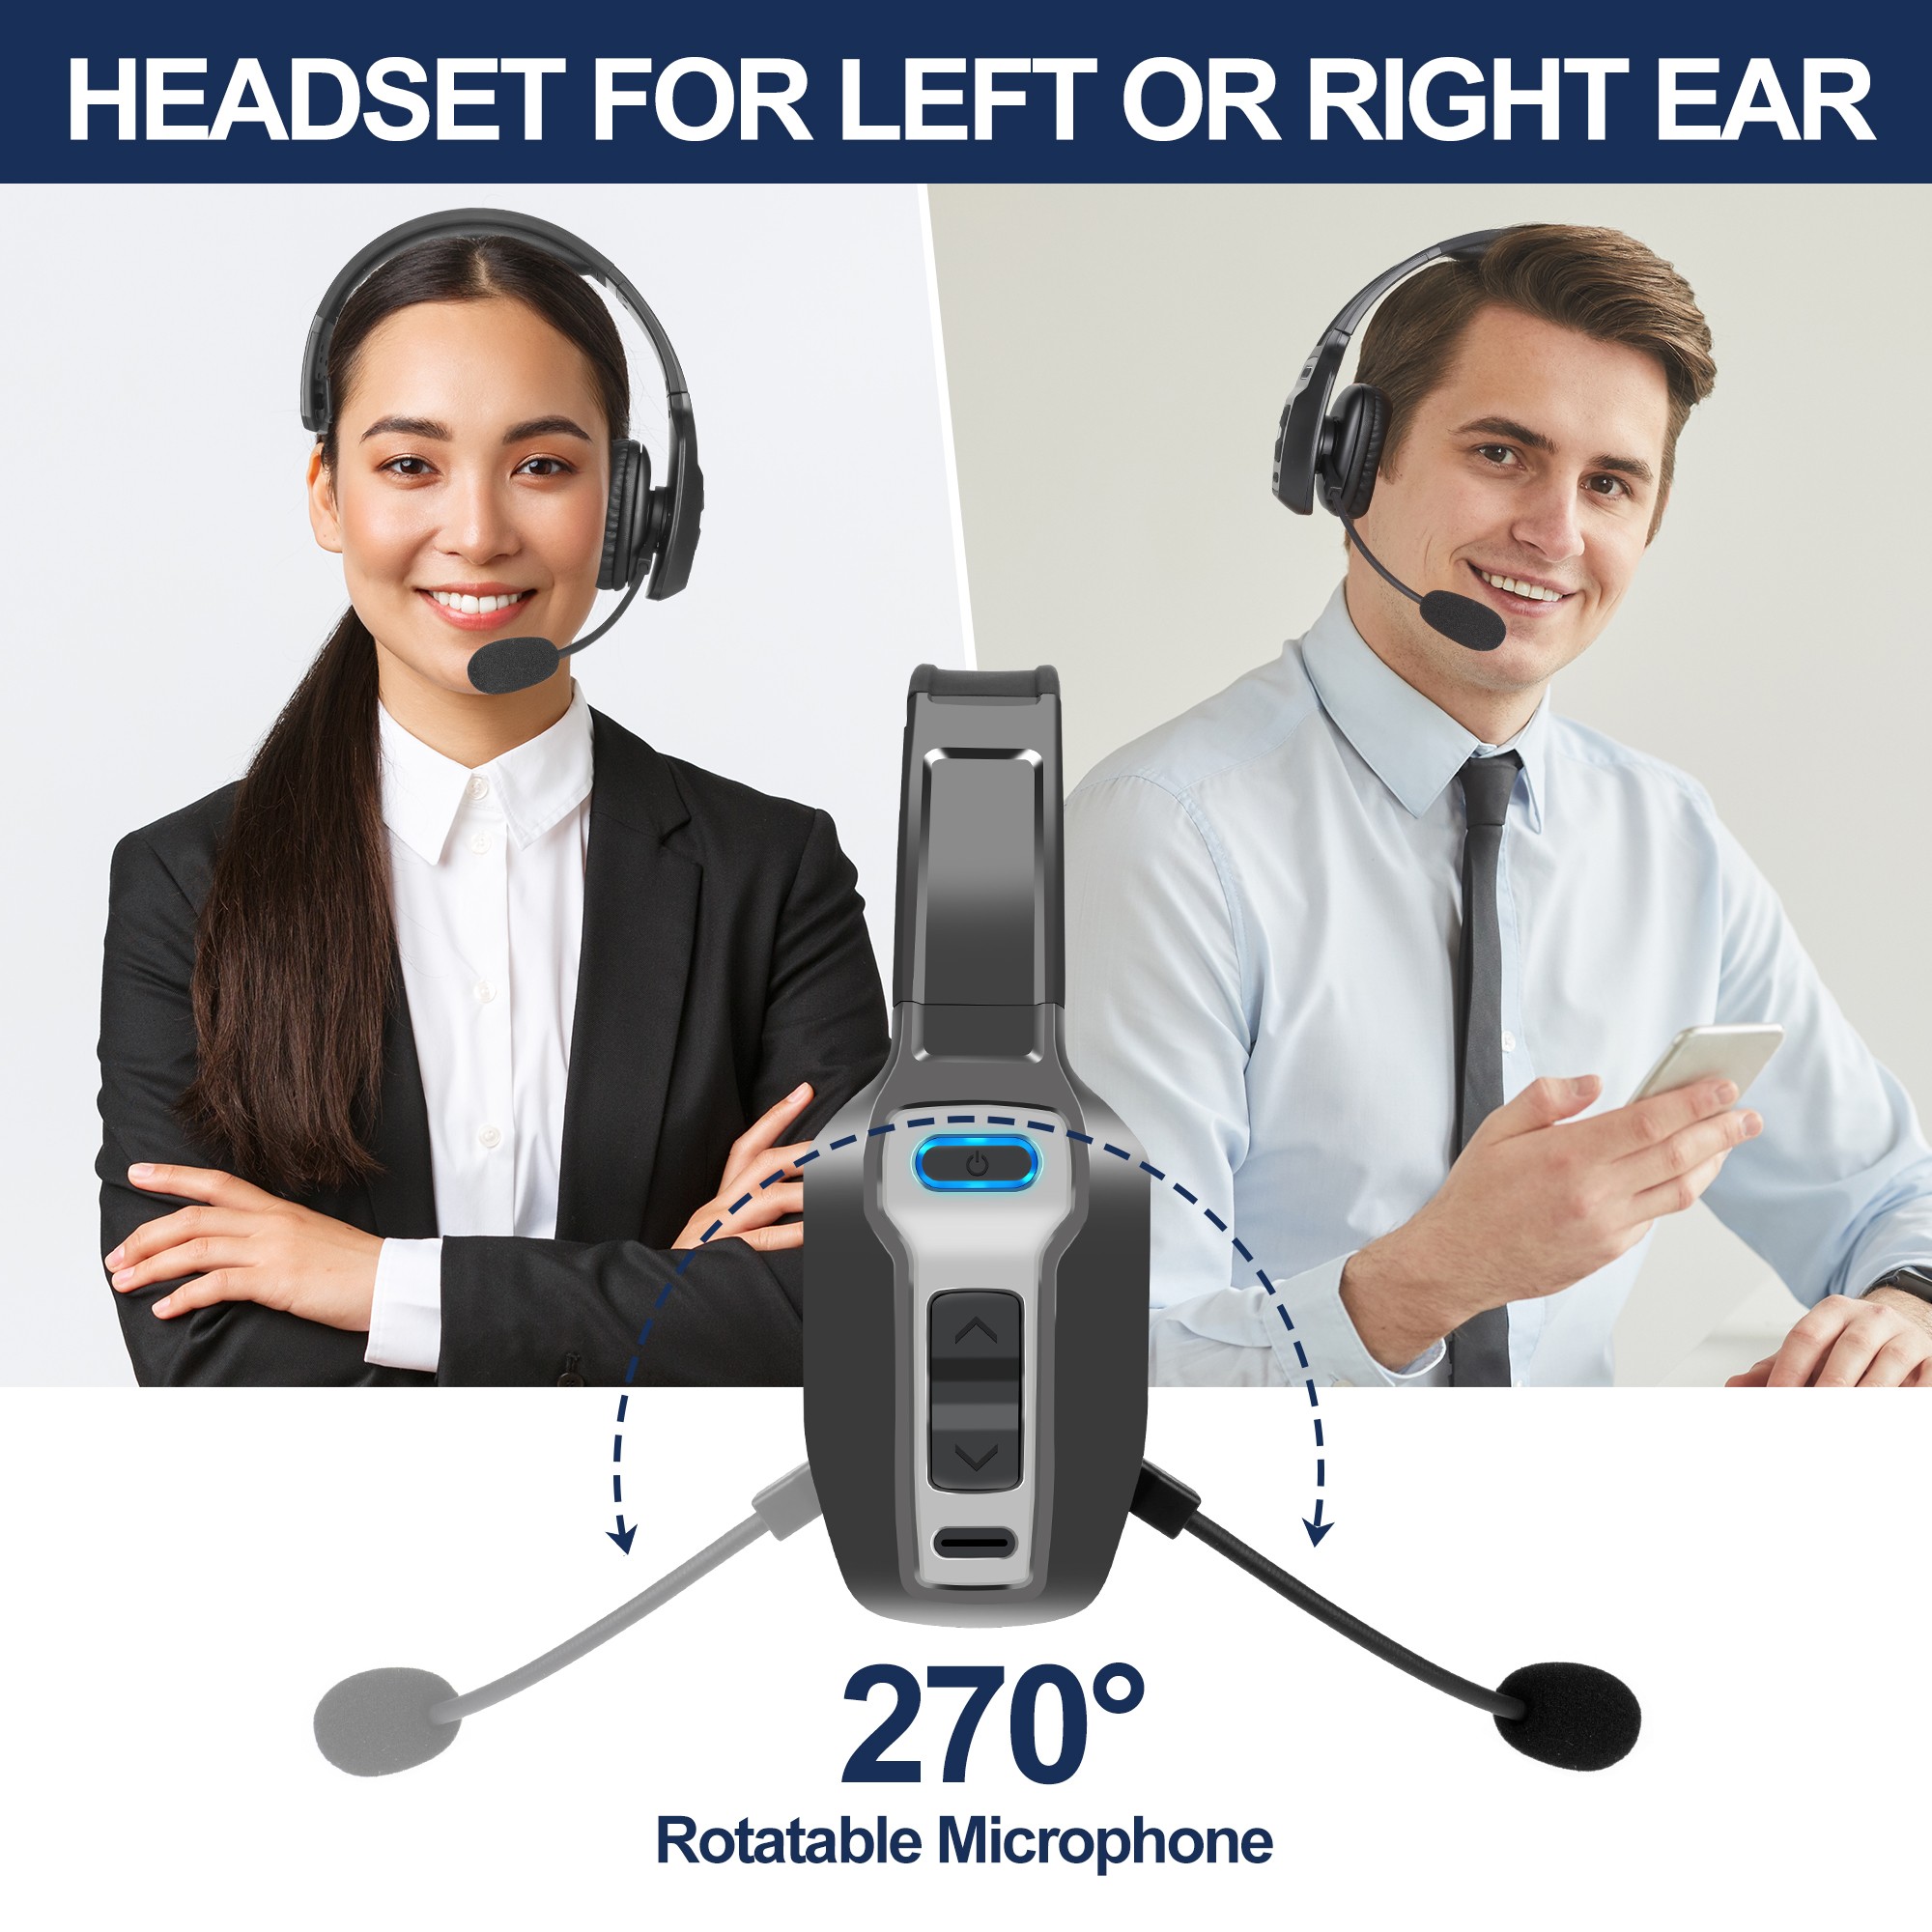 Trucker Bluetooth Headset, Sarevile V5.2 Wireless Headset with Microphone, Wireless Headset with Mute for Driver Office Call Center, On Ear Bluetooth Headphone for Cell Phones, Laptops and Computers